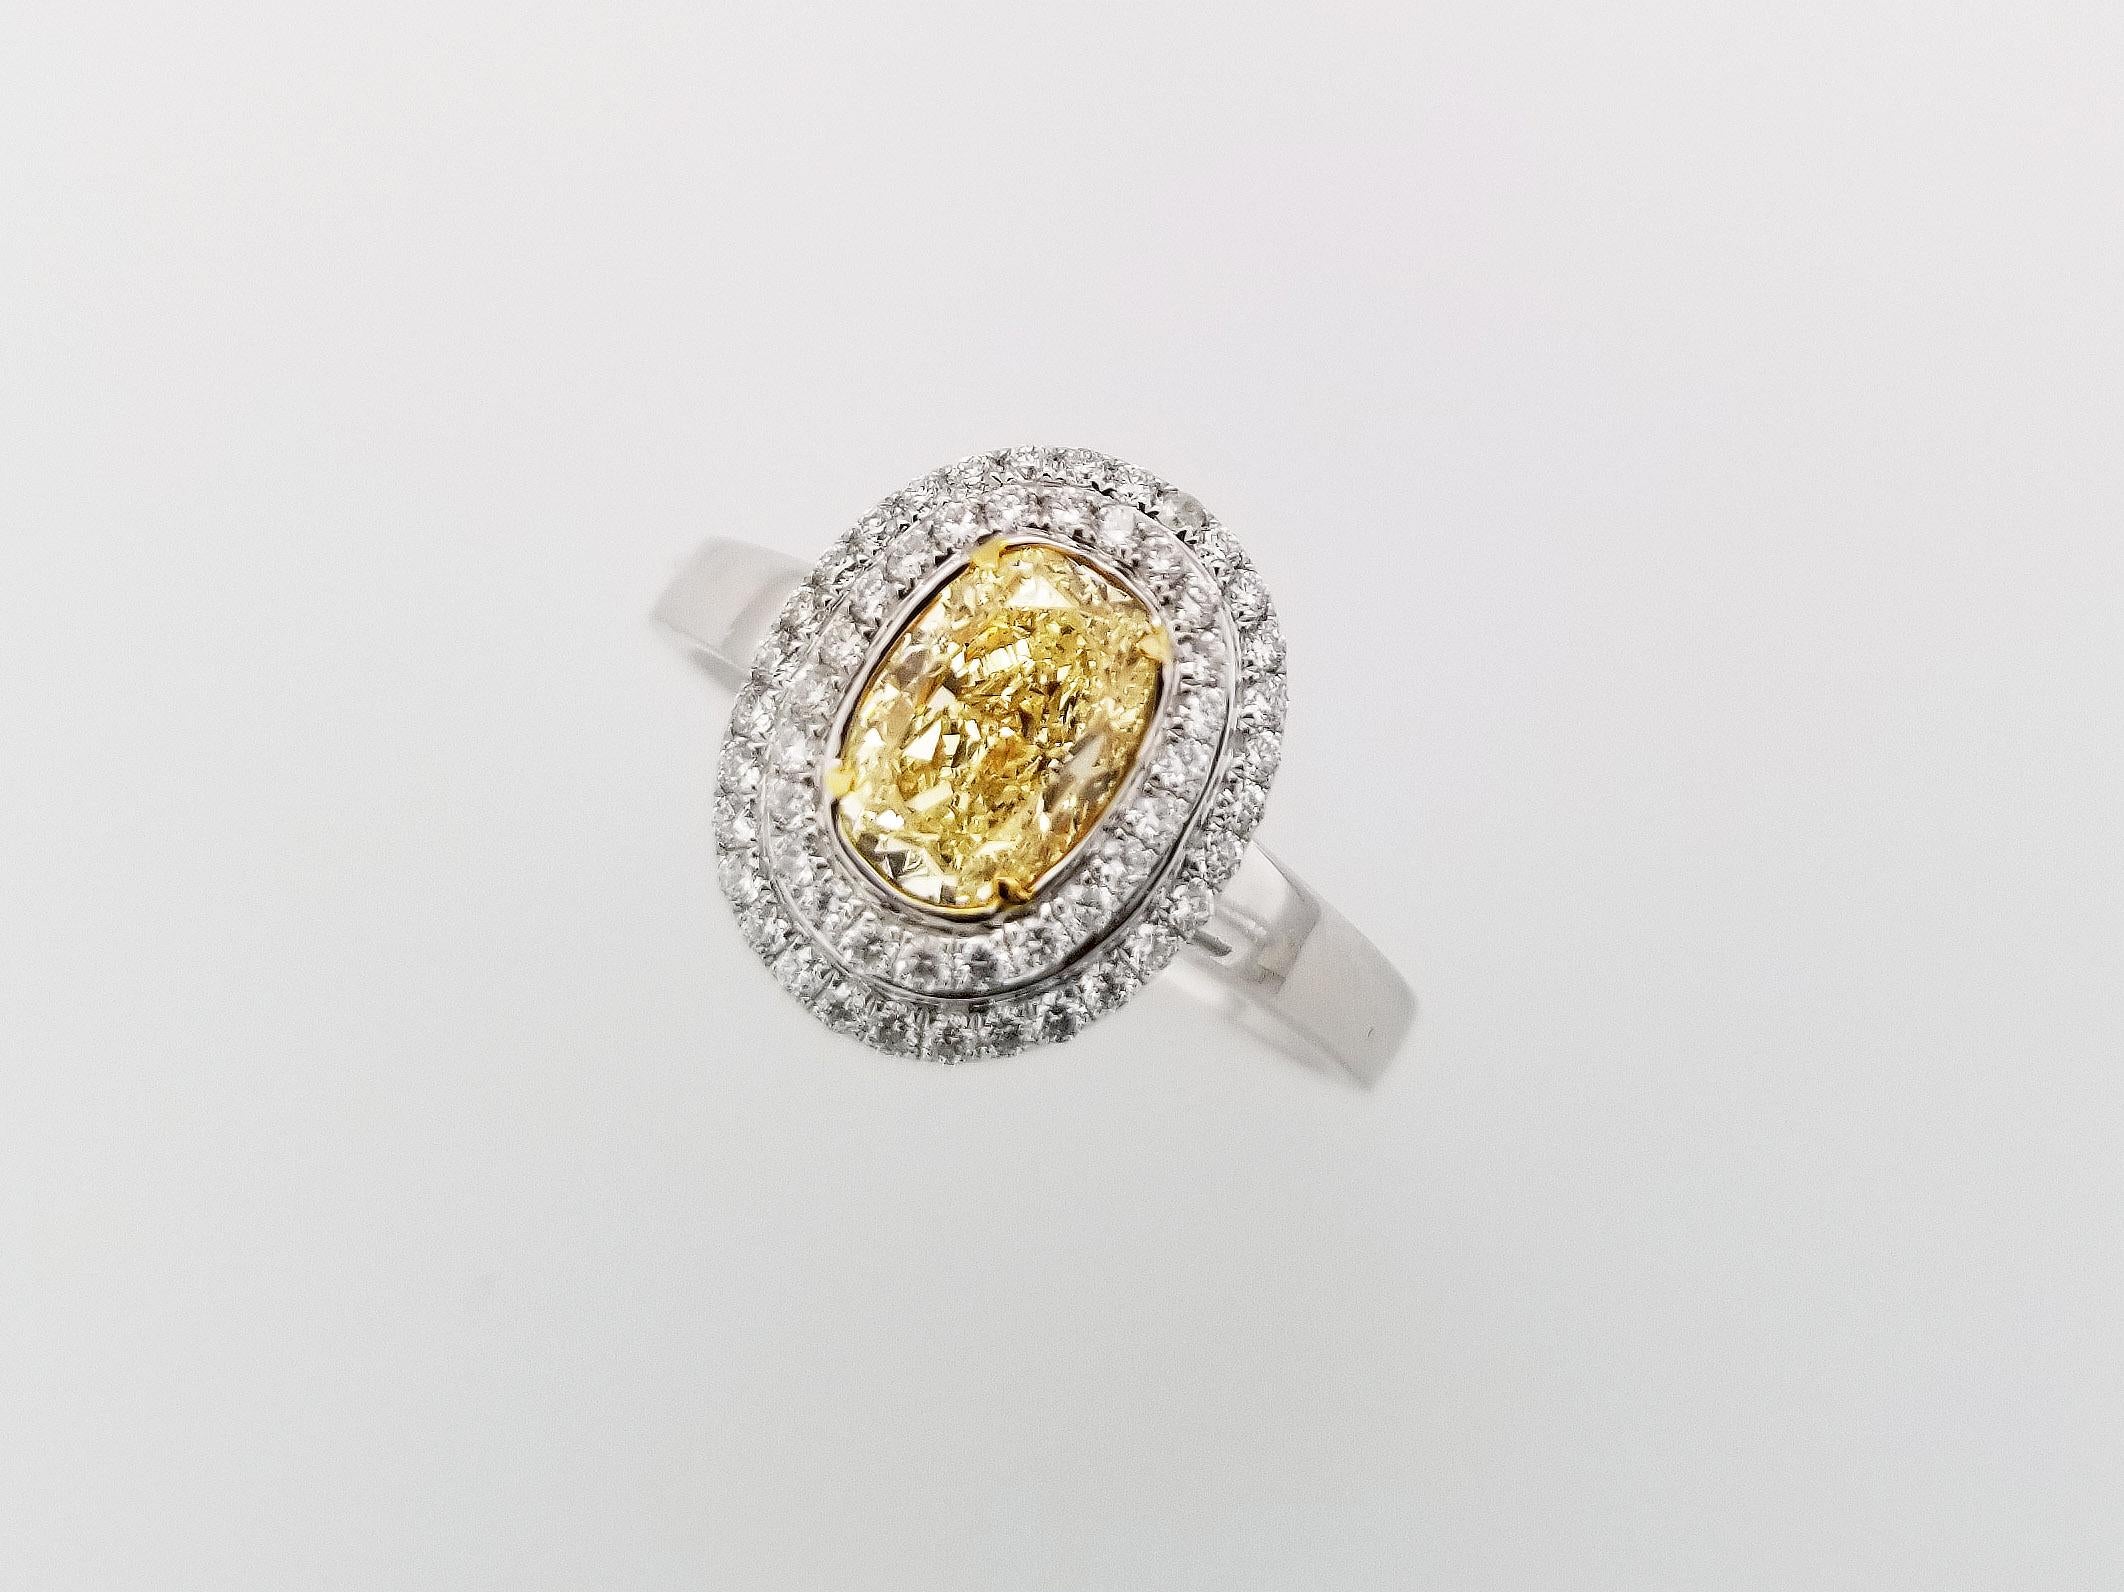 Mother's Day Gift Guide!

Halo Ring with 1.20 Carat Fancy Light Yellow Diamond center stone, surrounded by two rows of round white diamonds, TCW 0.29. The center stone has a clarity of SI1 and the 18k white gold band can be resized upon request. All